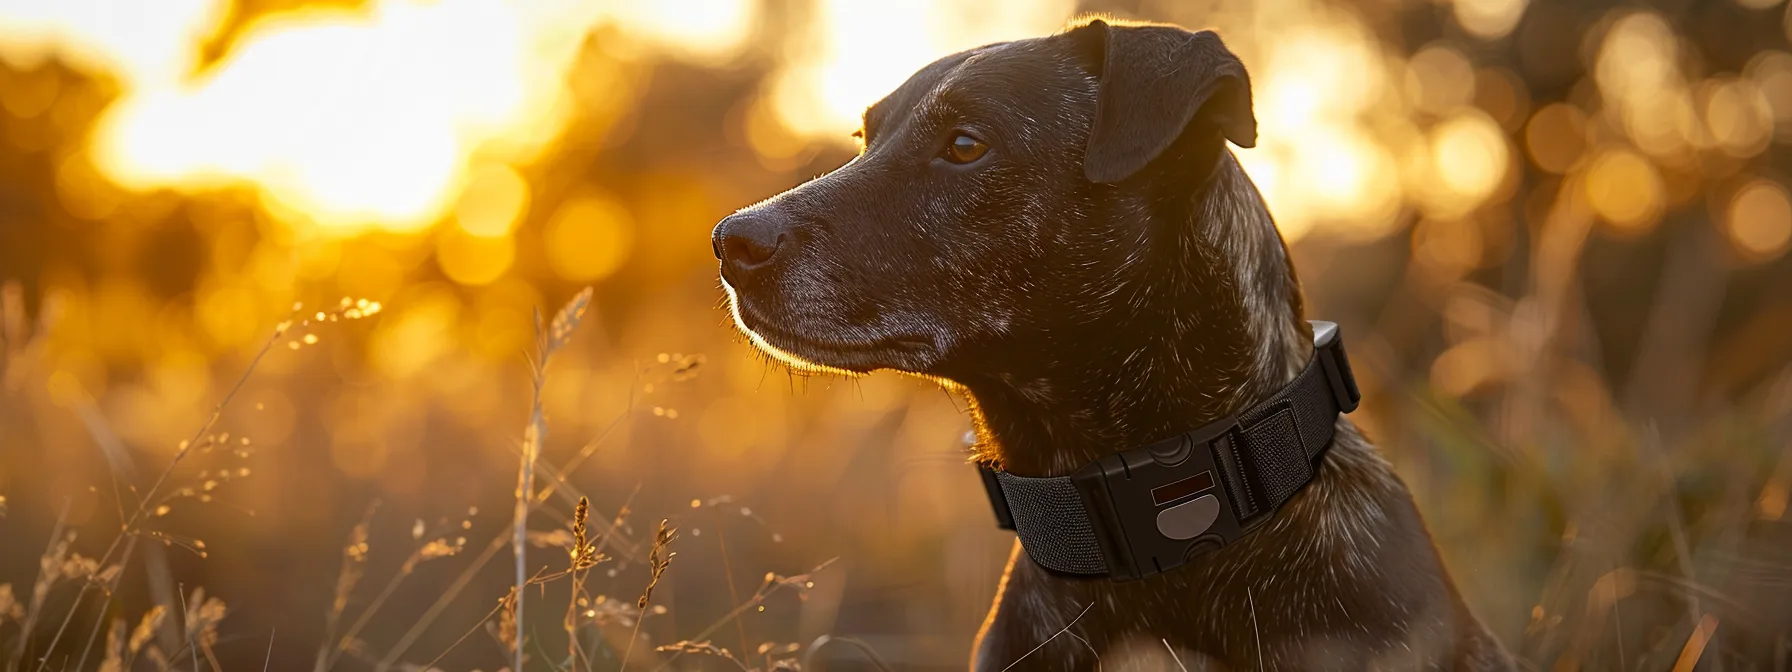 a dog wearing a sleek smart collar with a gps tracker and activity monitor attached.